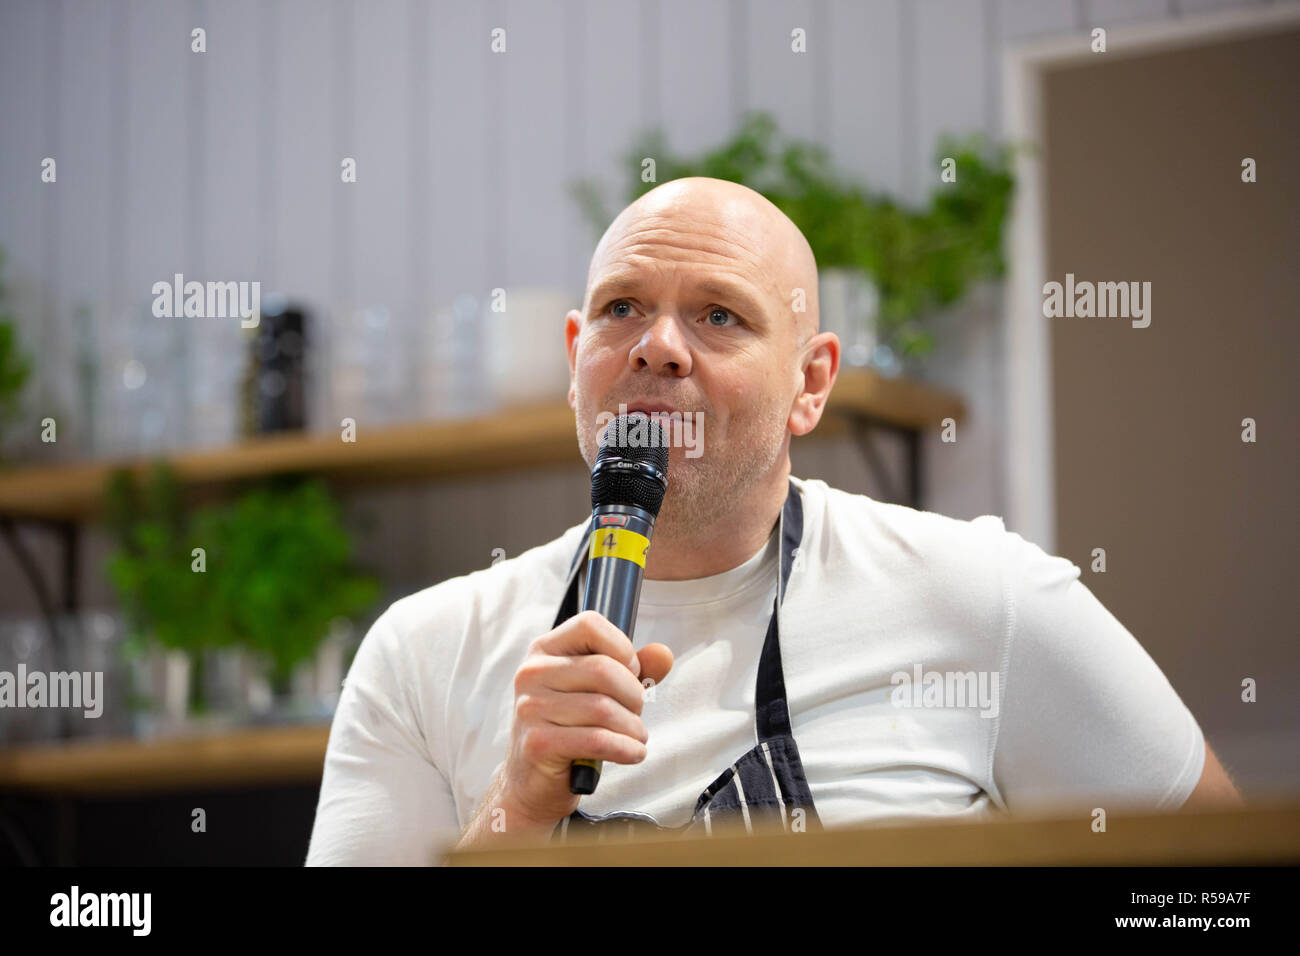 Birmingham, UK. 30th Nov, 2018. Tom Kerridge on the BBC Good food stage talking about his restaurants and his books. Credit: steven roe/Alamy Live News Stock Photo